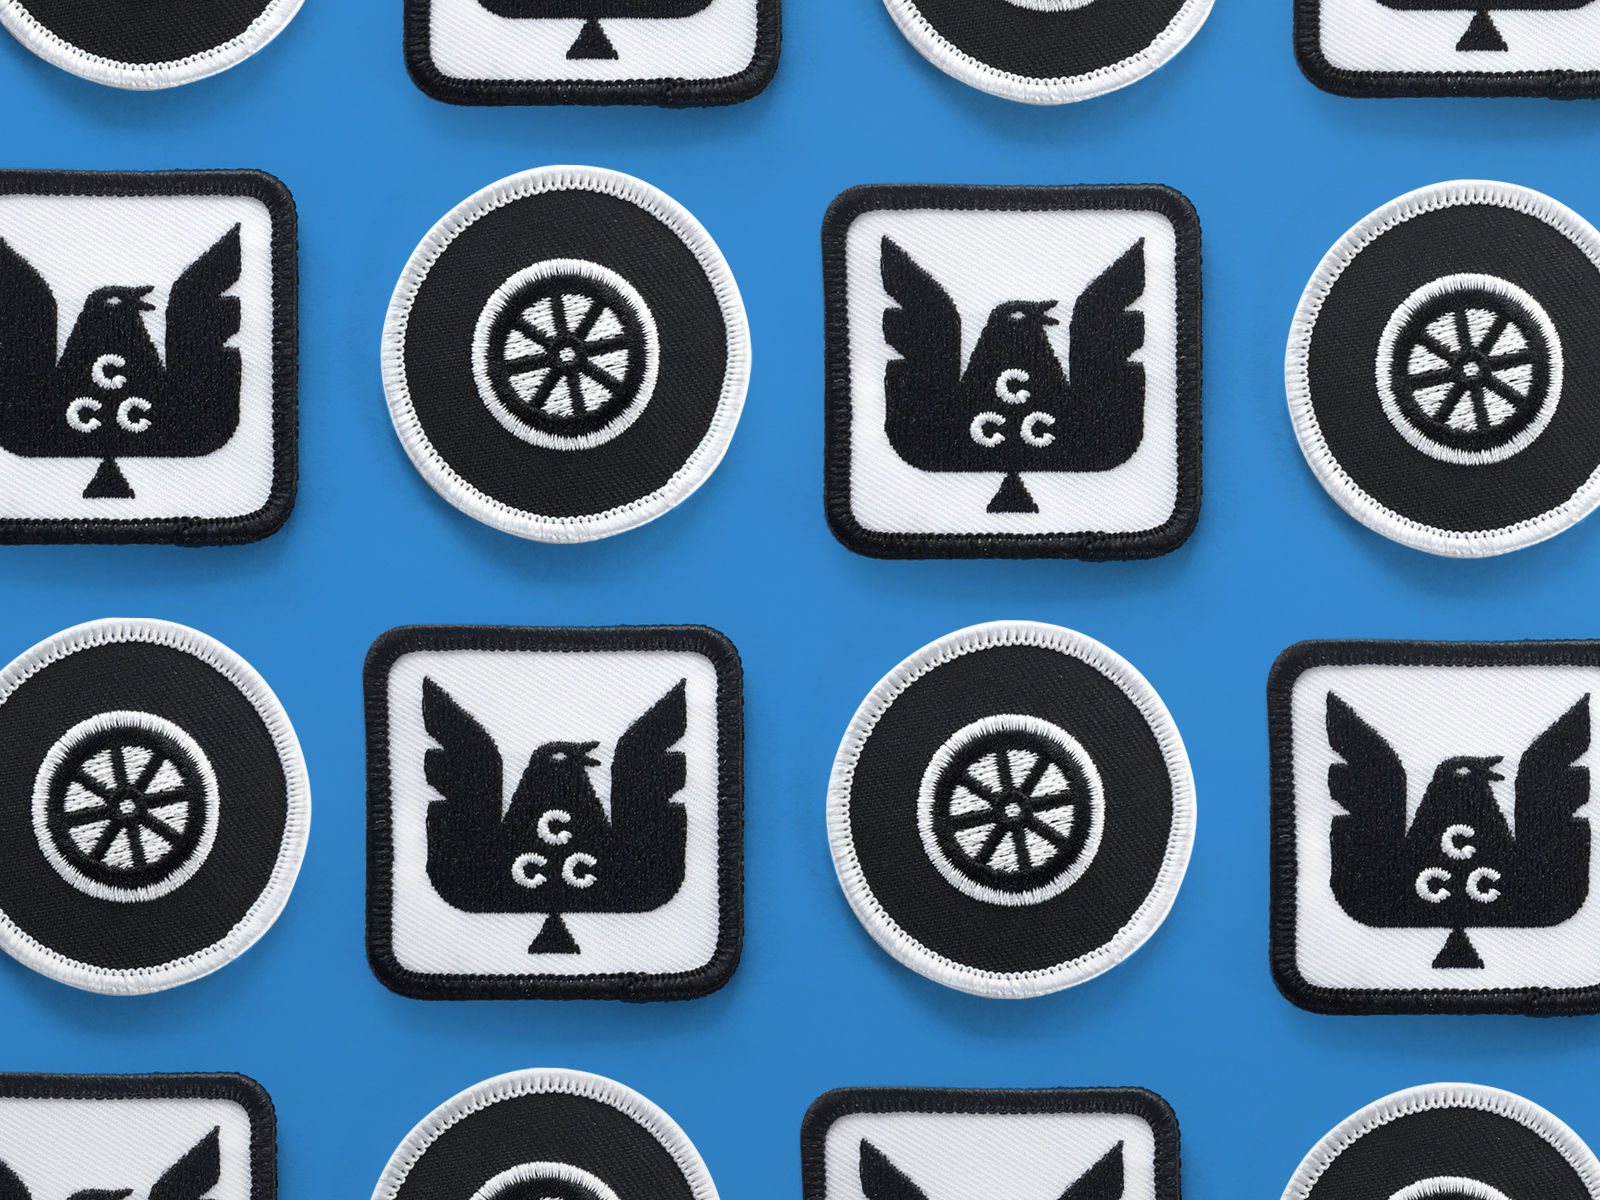 Car Car Club Patches by Eight Hour Day on Dribbble